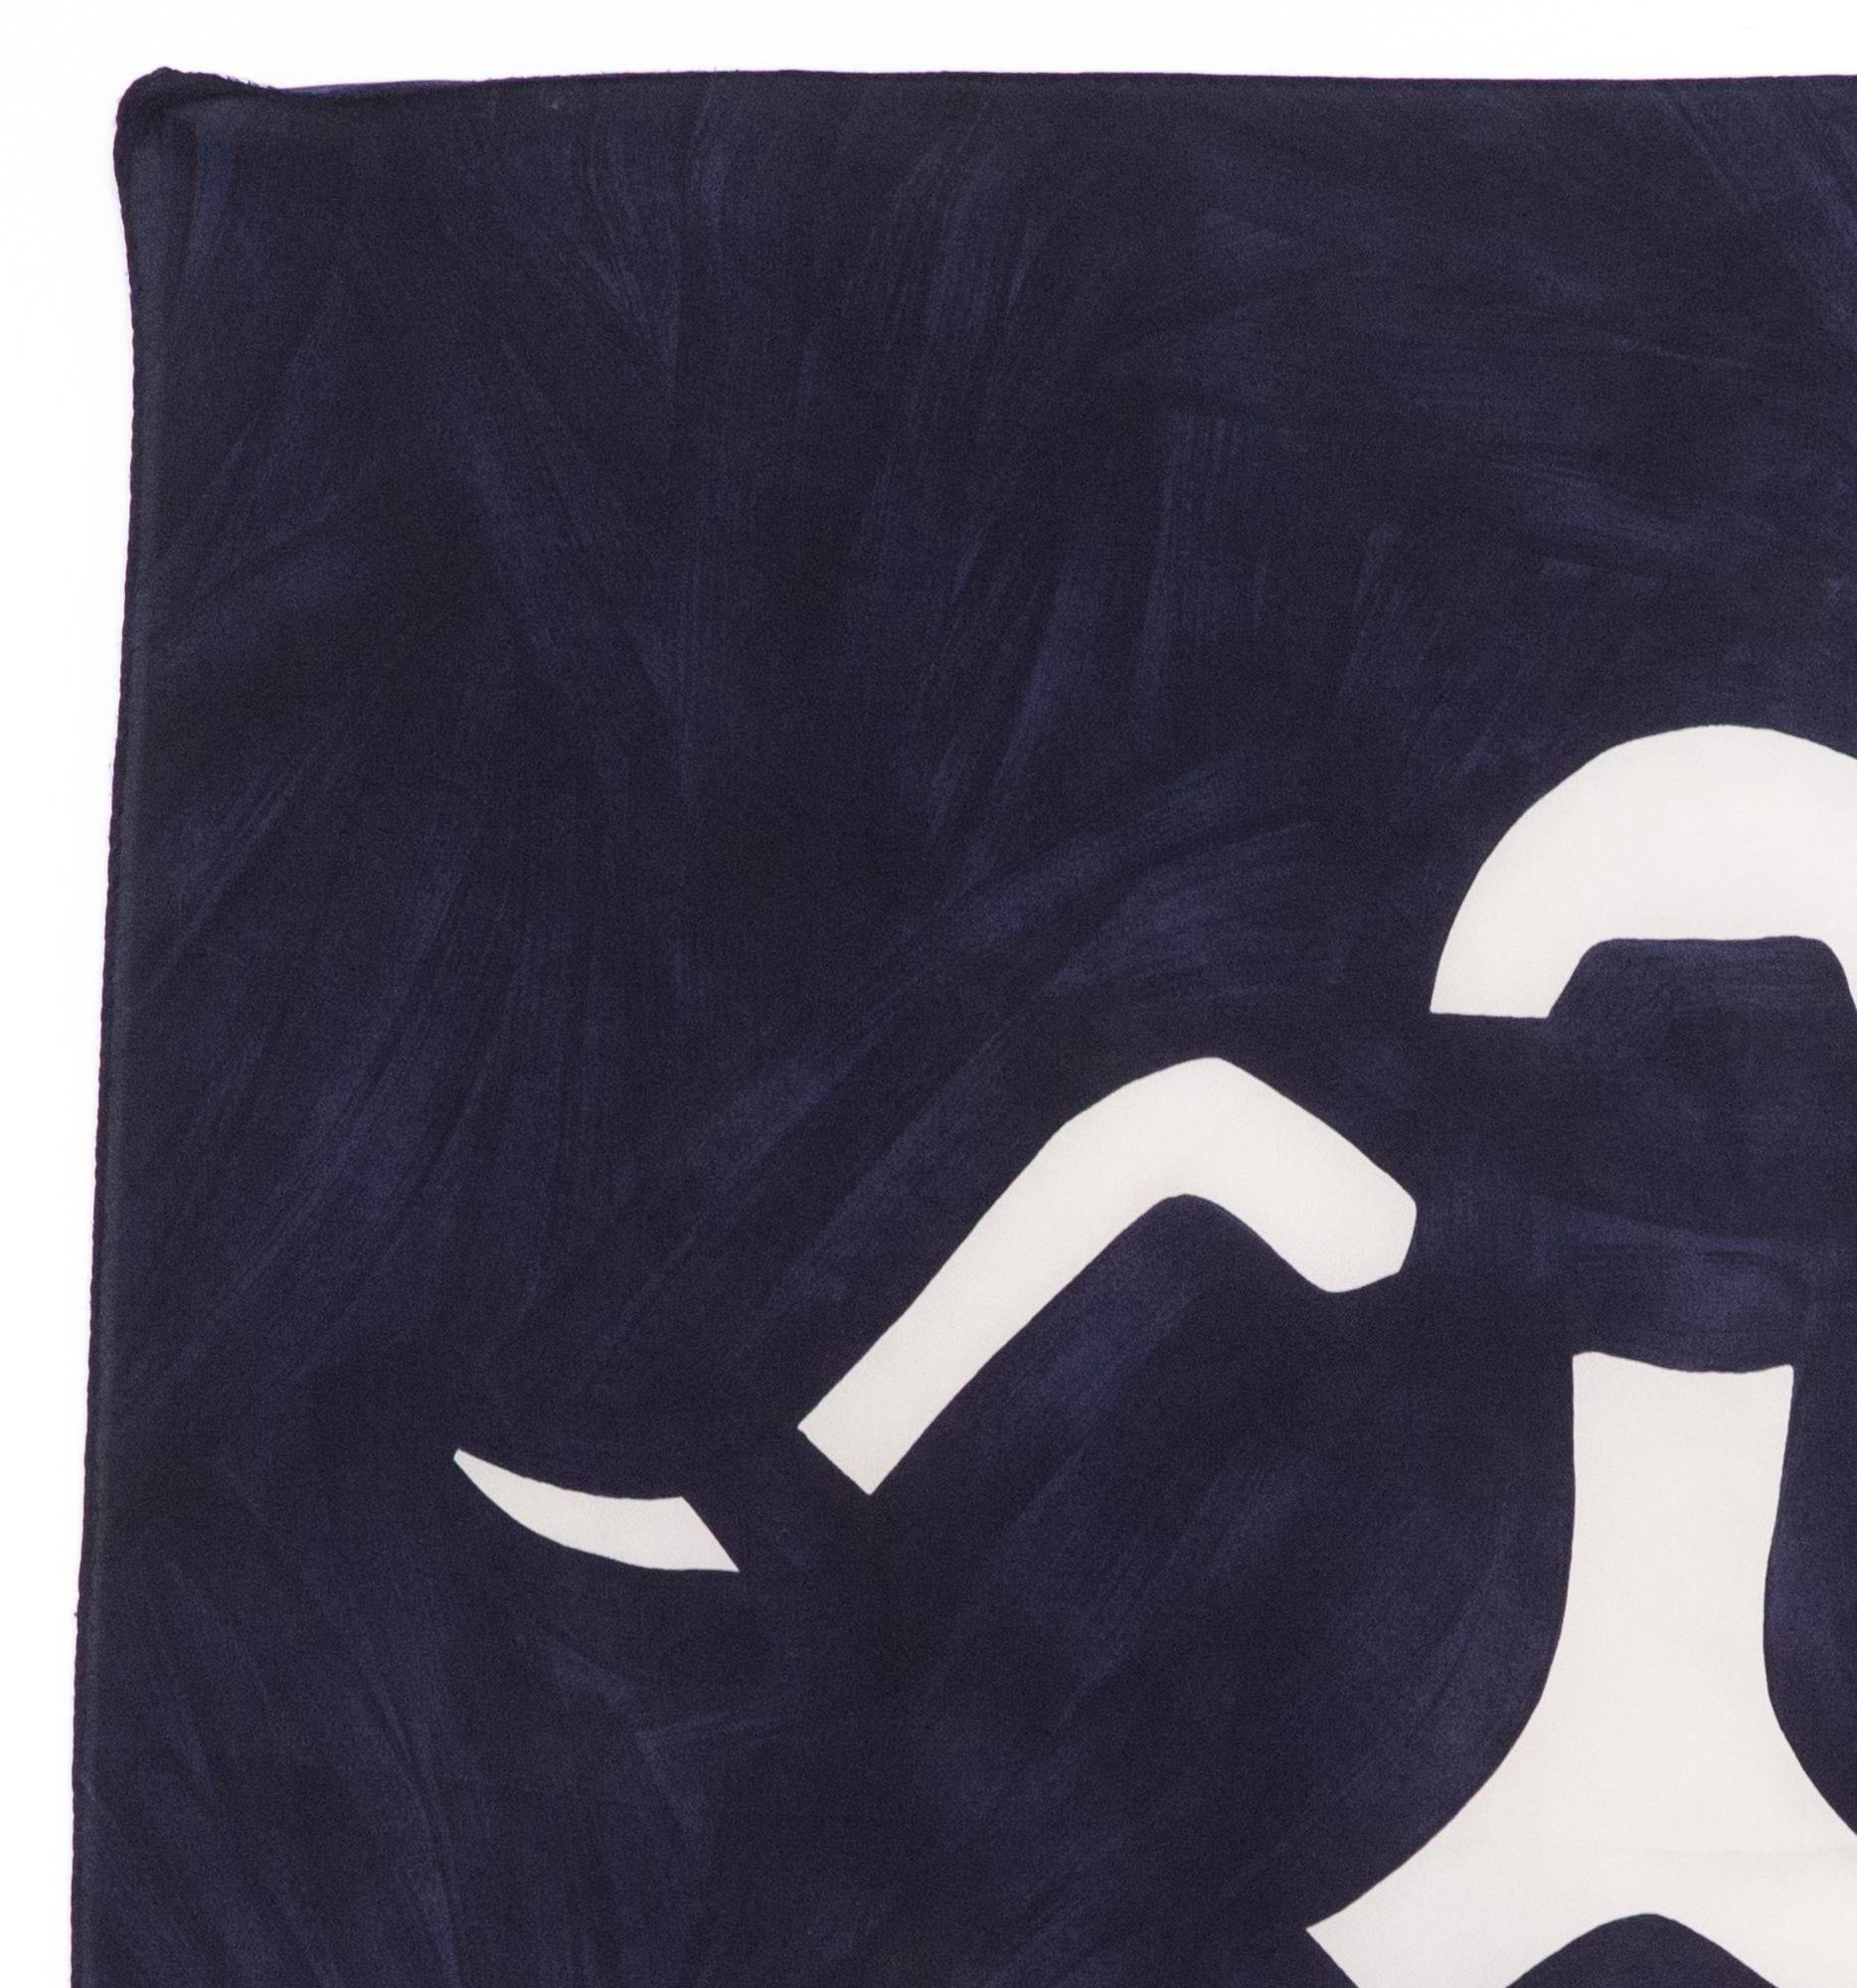 Rare 1960 Courreges navy silk scarf featuring an abstract articulated puppet, an irregular ground, a Courreges signature.
In Good vintage condition. Made in France.
29.5in. (75cm) X 29.5in. (75cm)
We guarantee you will receive this  iconic item as